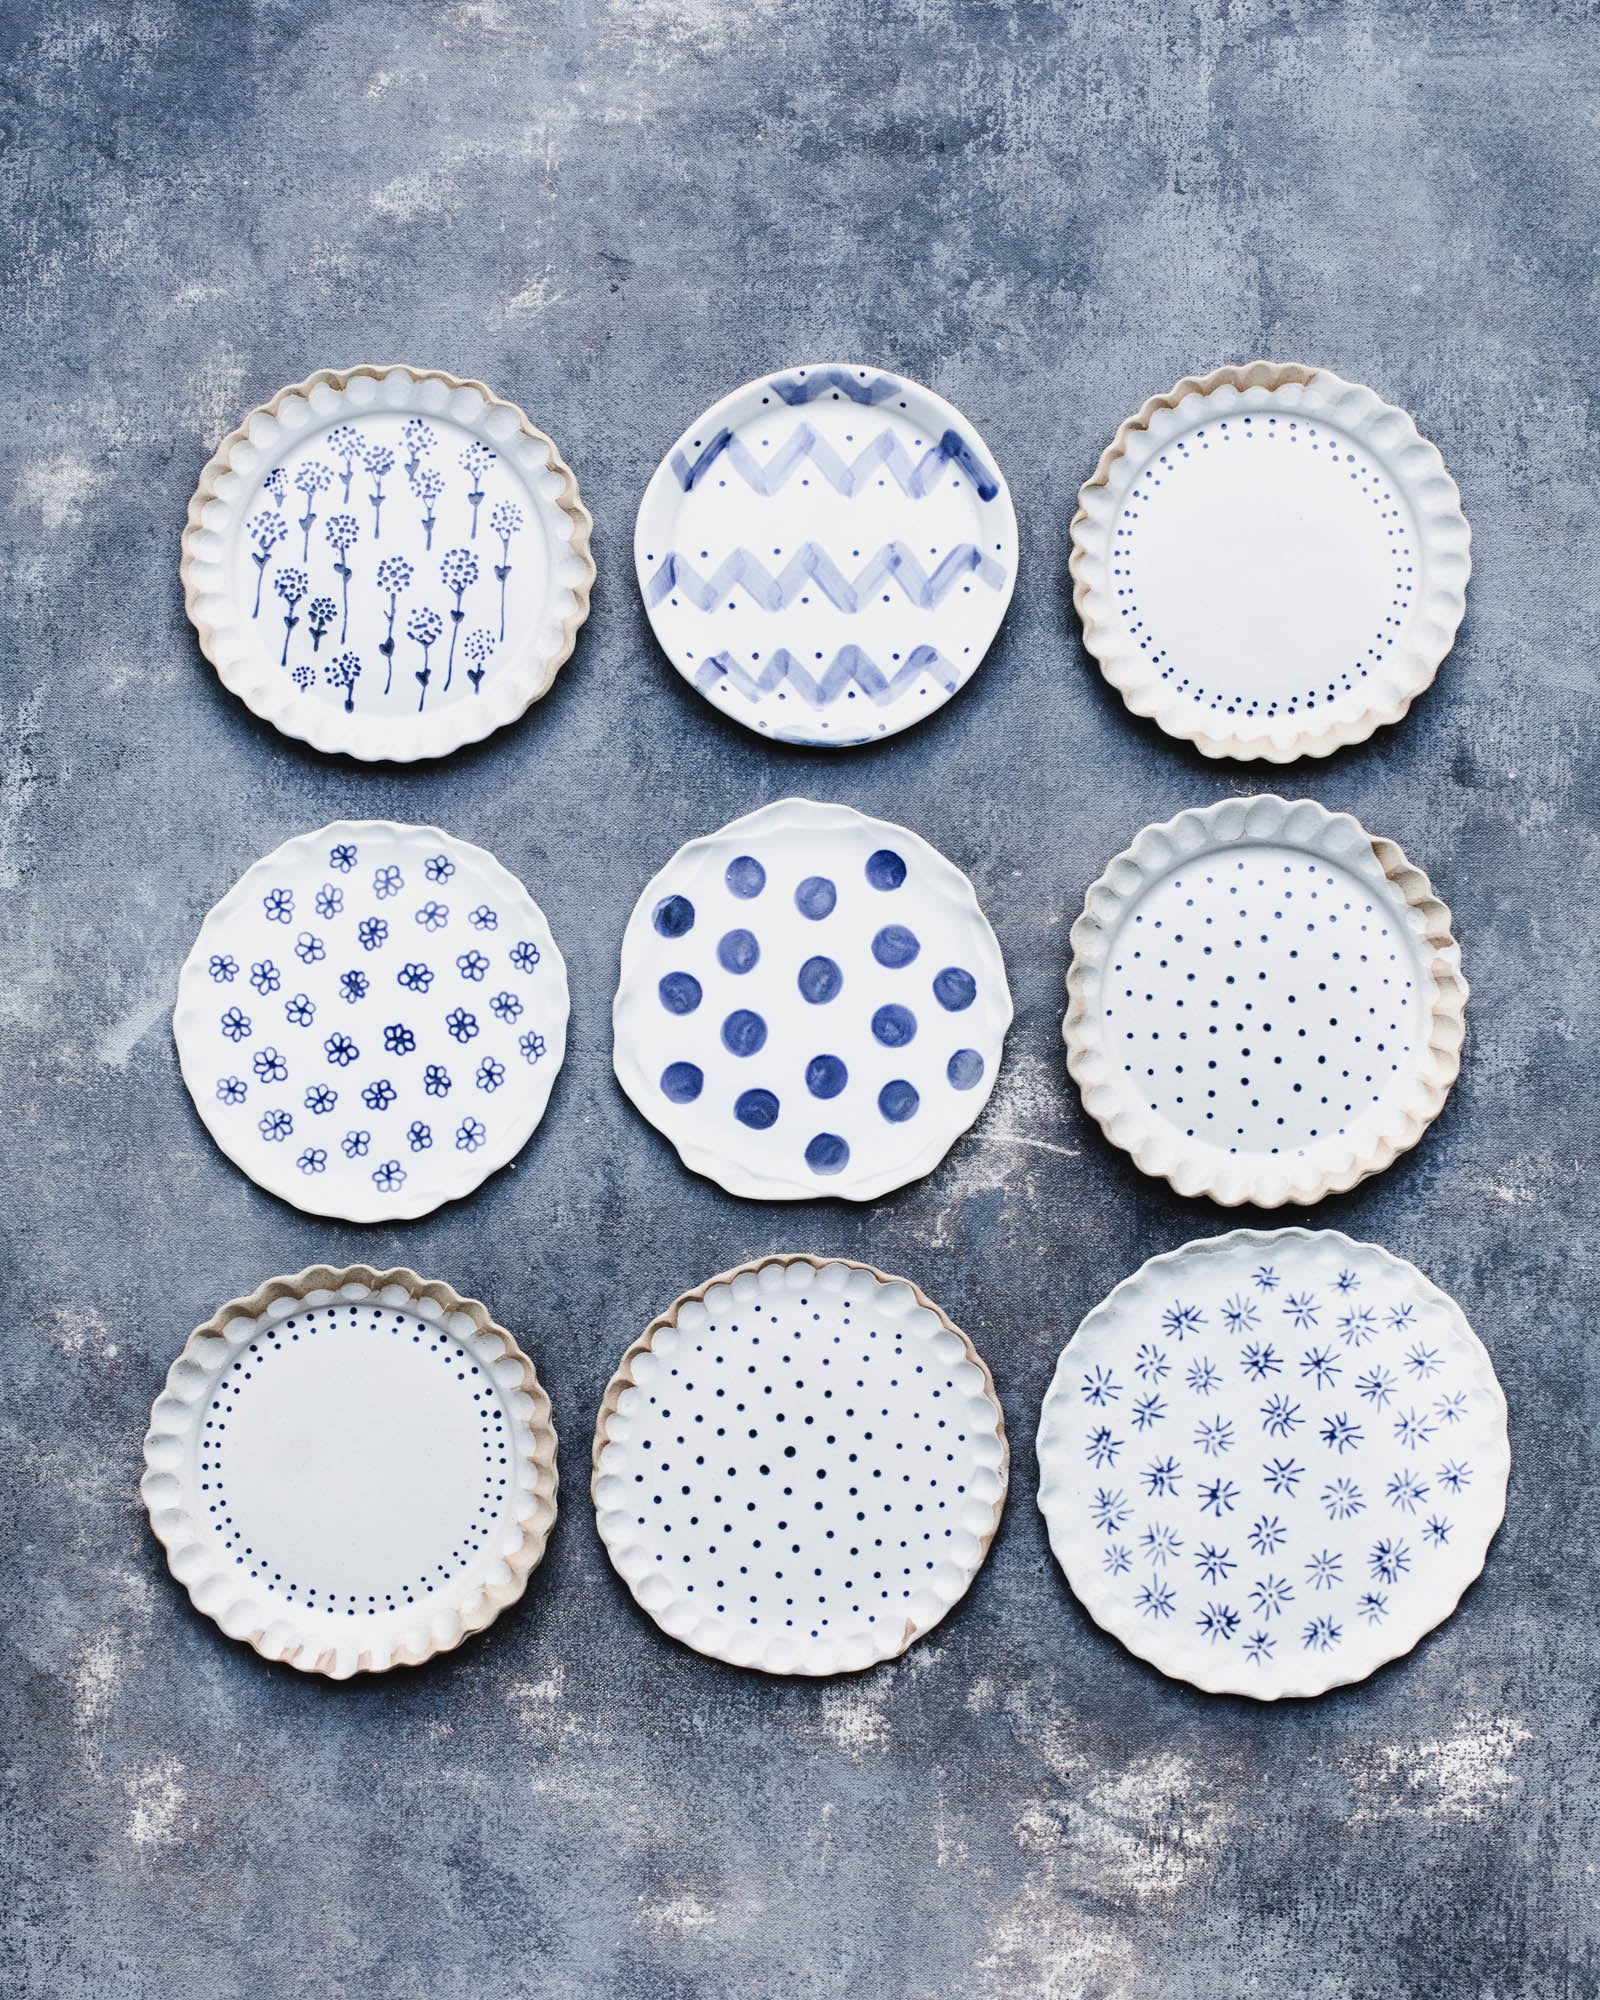 Handmade patterned ceramic plates by clay beehive